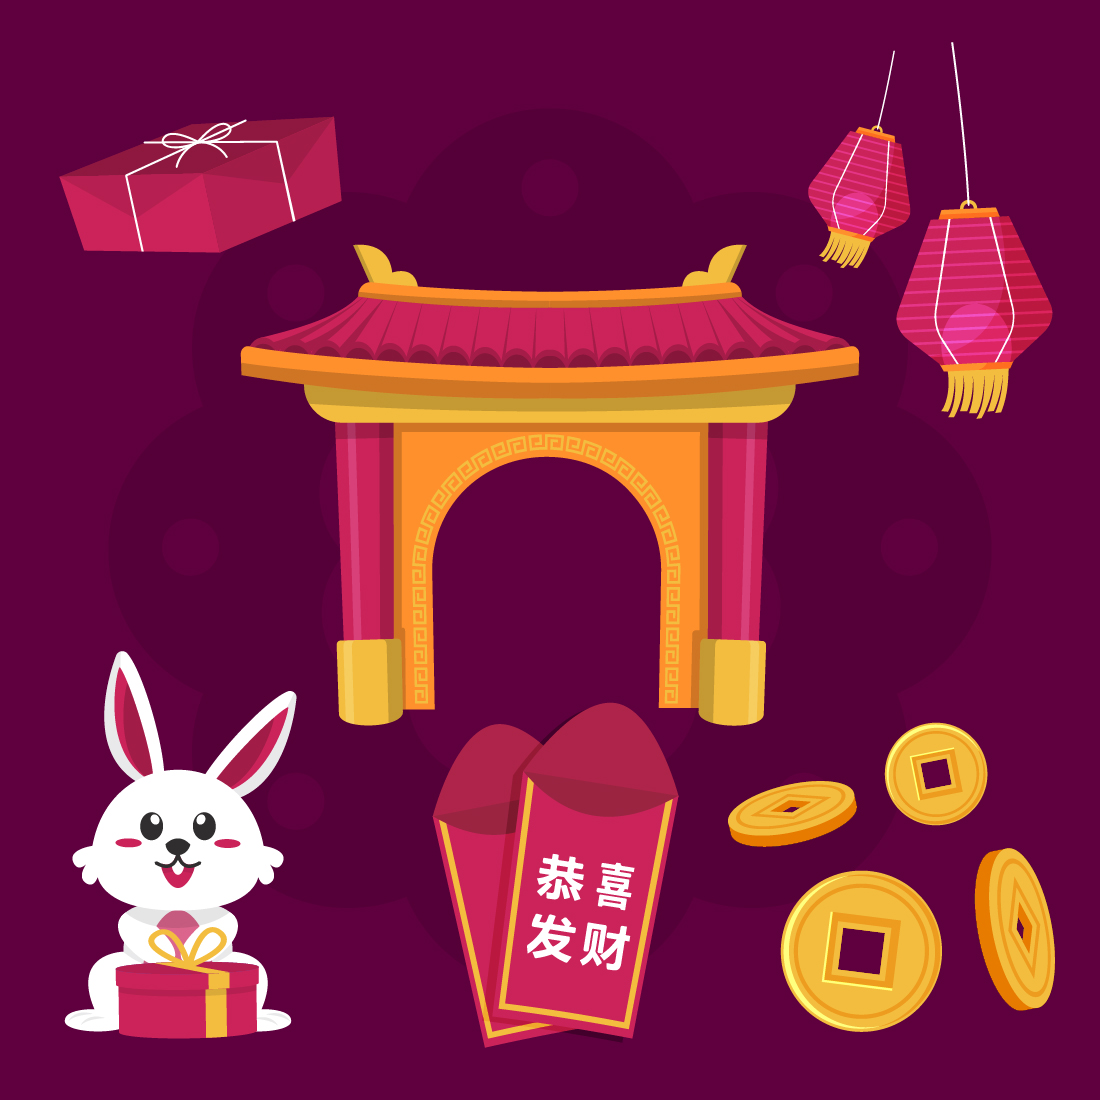 Chinese New Year Elements Illustration - Only $12 preview image.